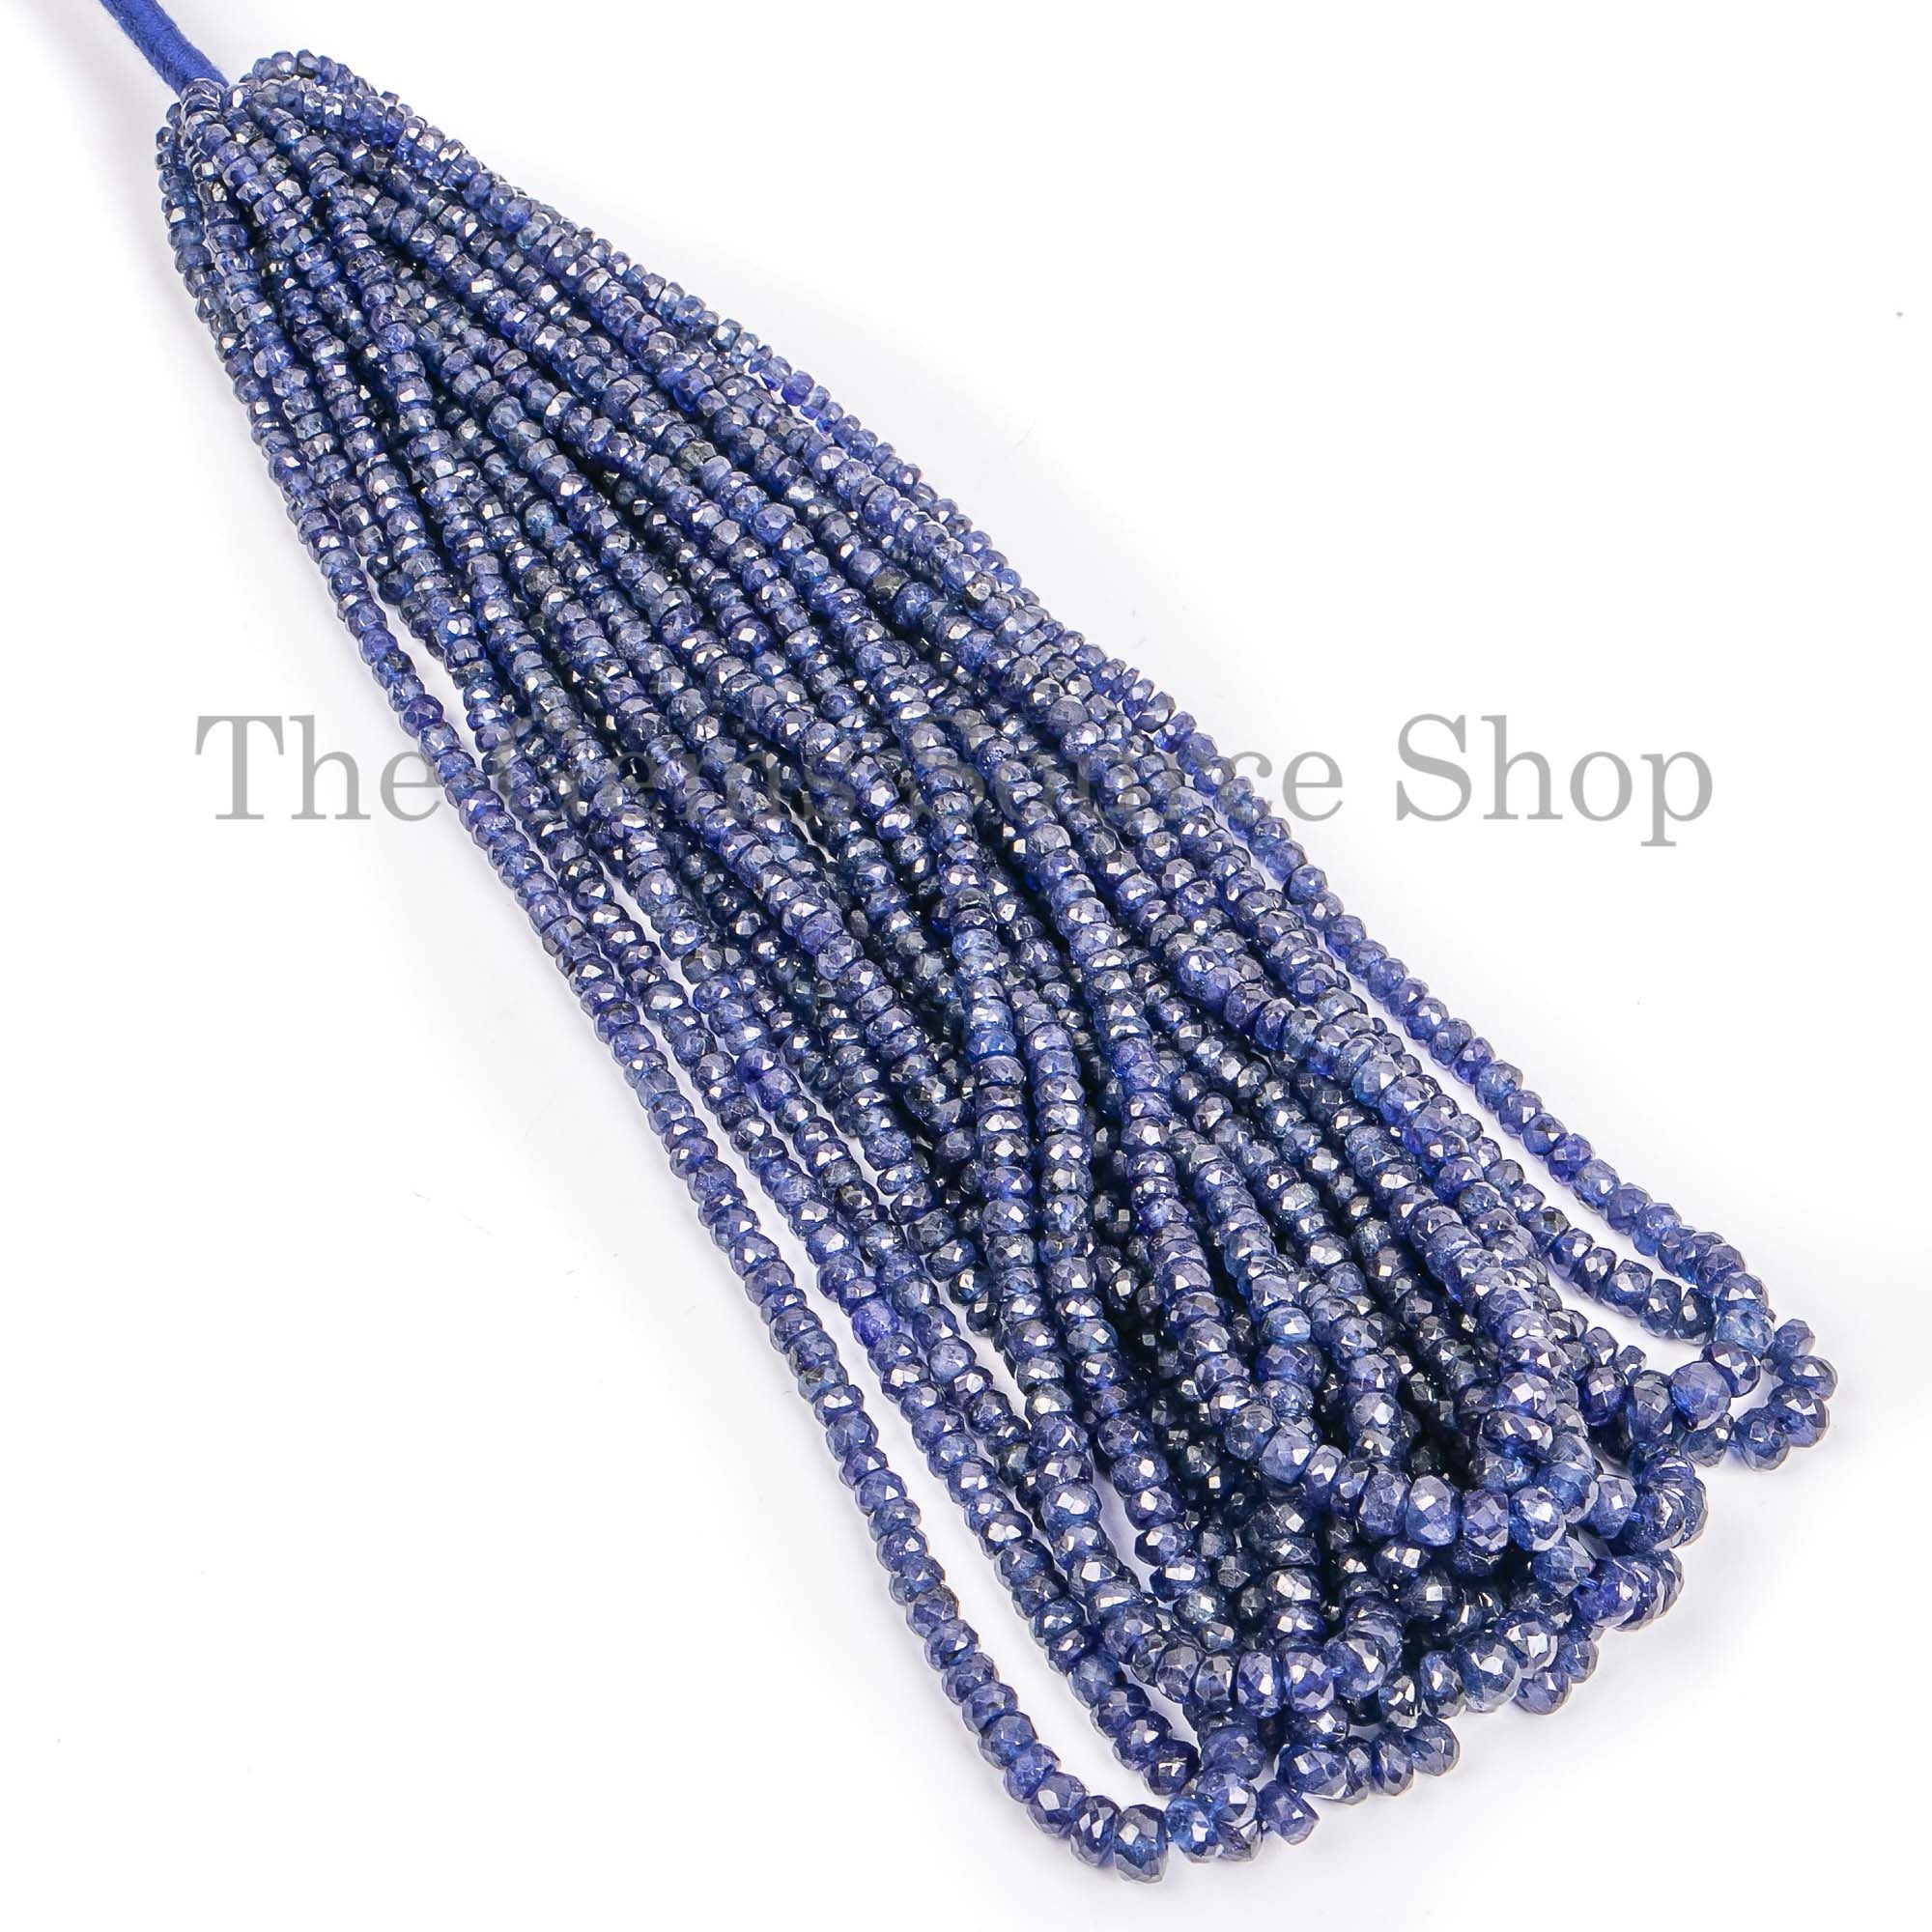 Natural Blue Sapphire Faceted Beads, Blue Sapphire Rondelle Beads, Gemstone Beads